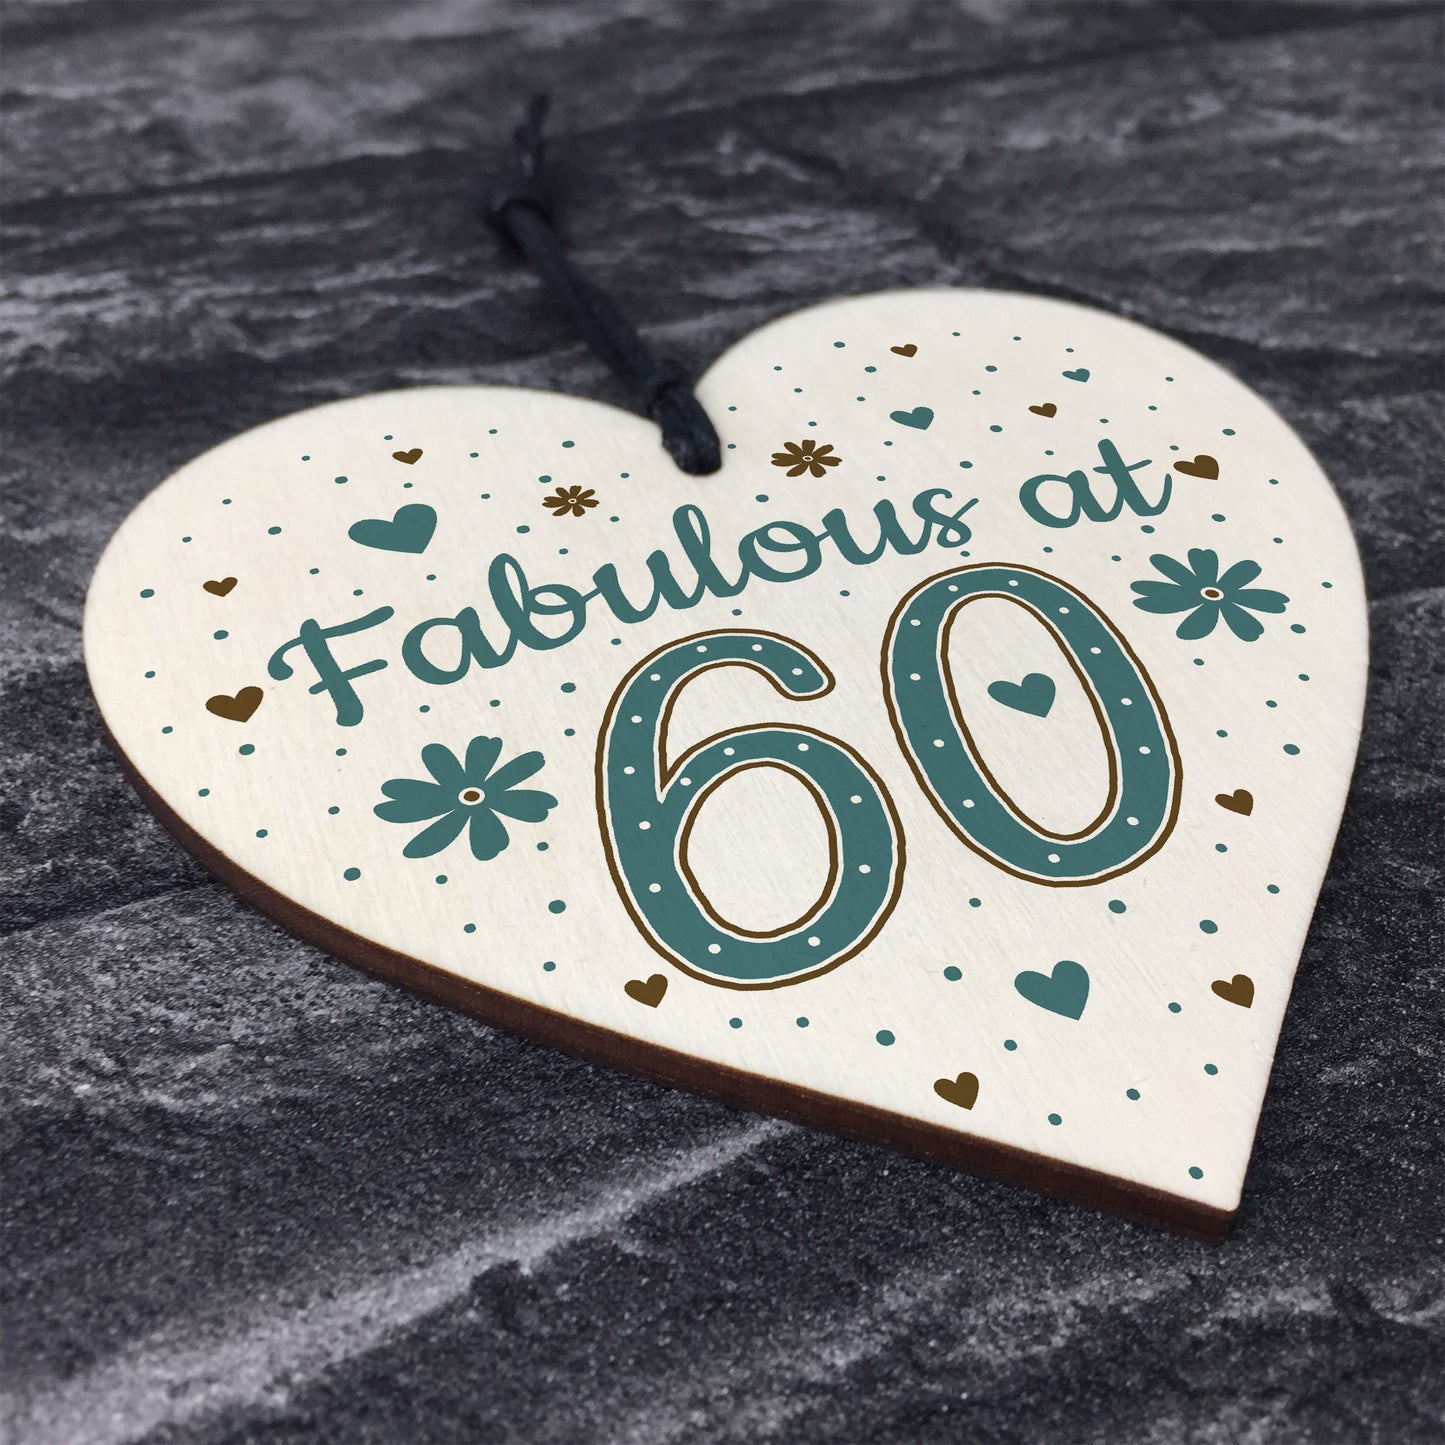 Fabulous At 60 60th 50th 40th Birthday Gifts For Women Men Heart